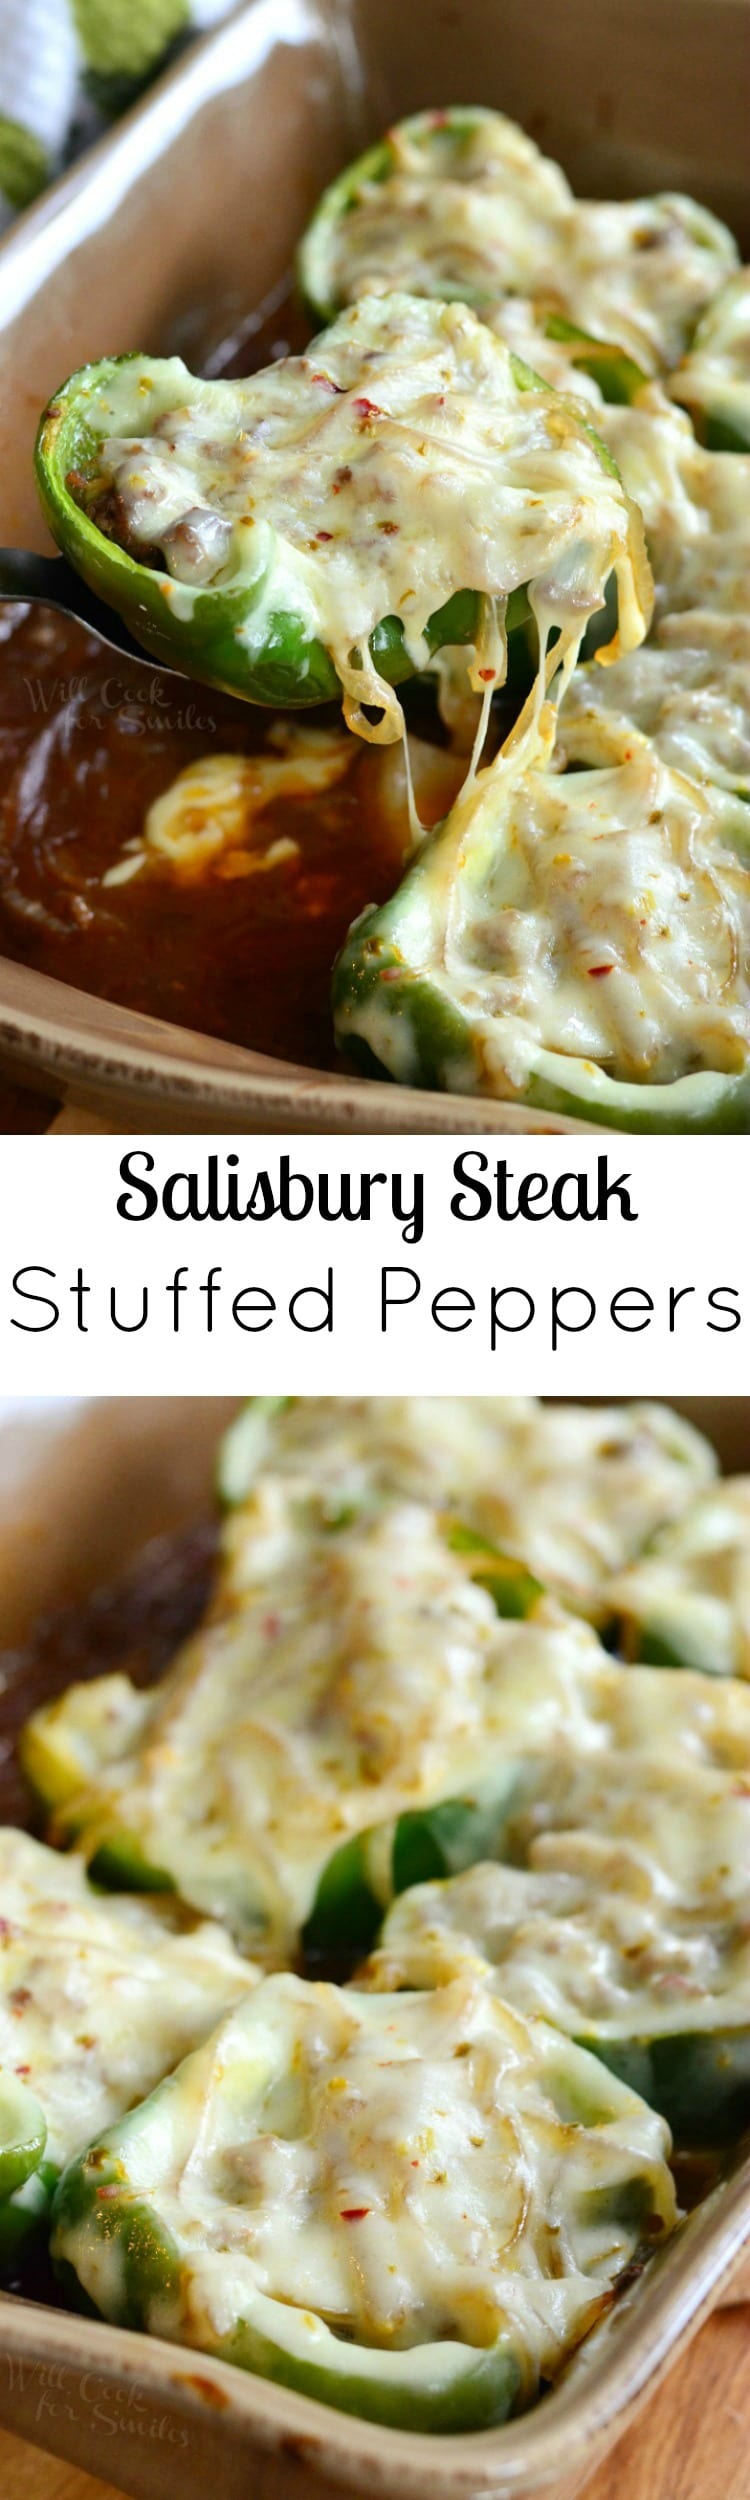 top photo Stuffed Peppers with cheese on top in a brown casserole dish being lifted out by a serving spoon bottom photo Salisbury Steak Stuffed Peppers with cheese on top in a brown casserole dish  